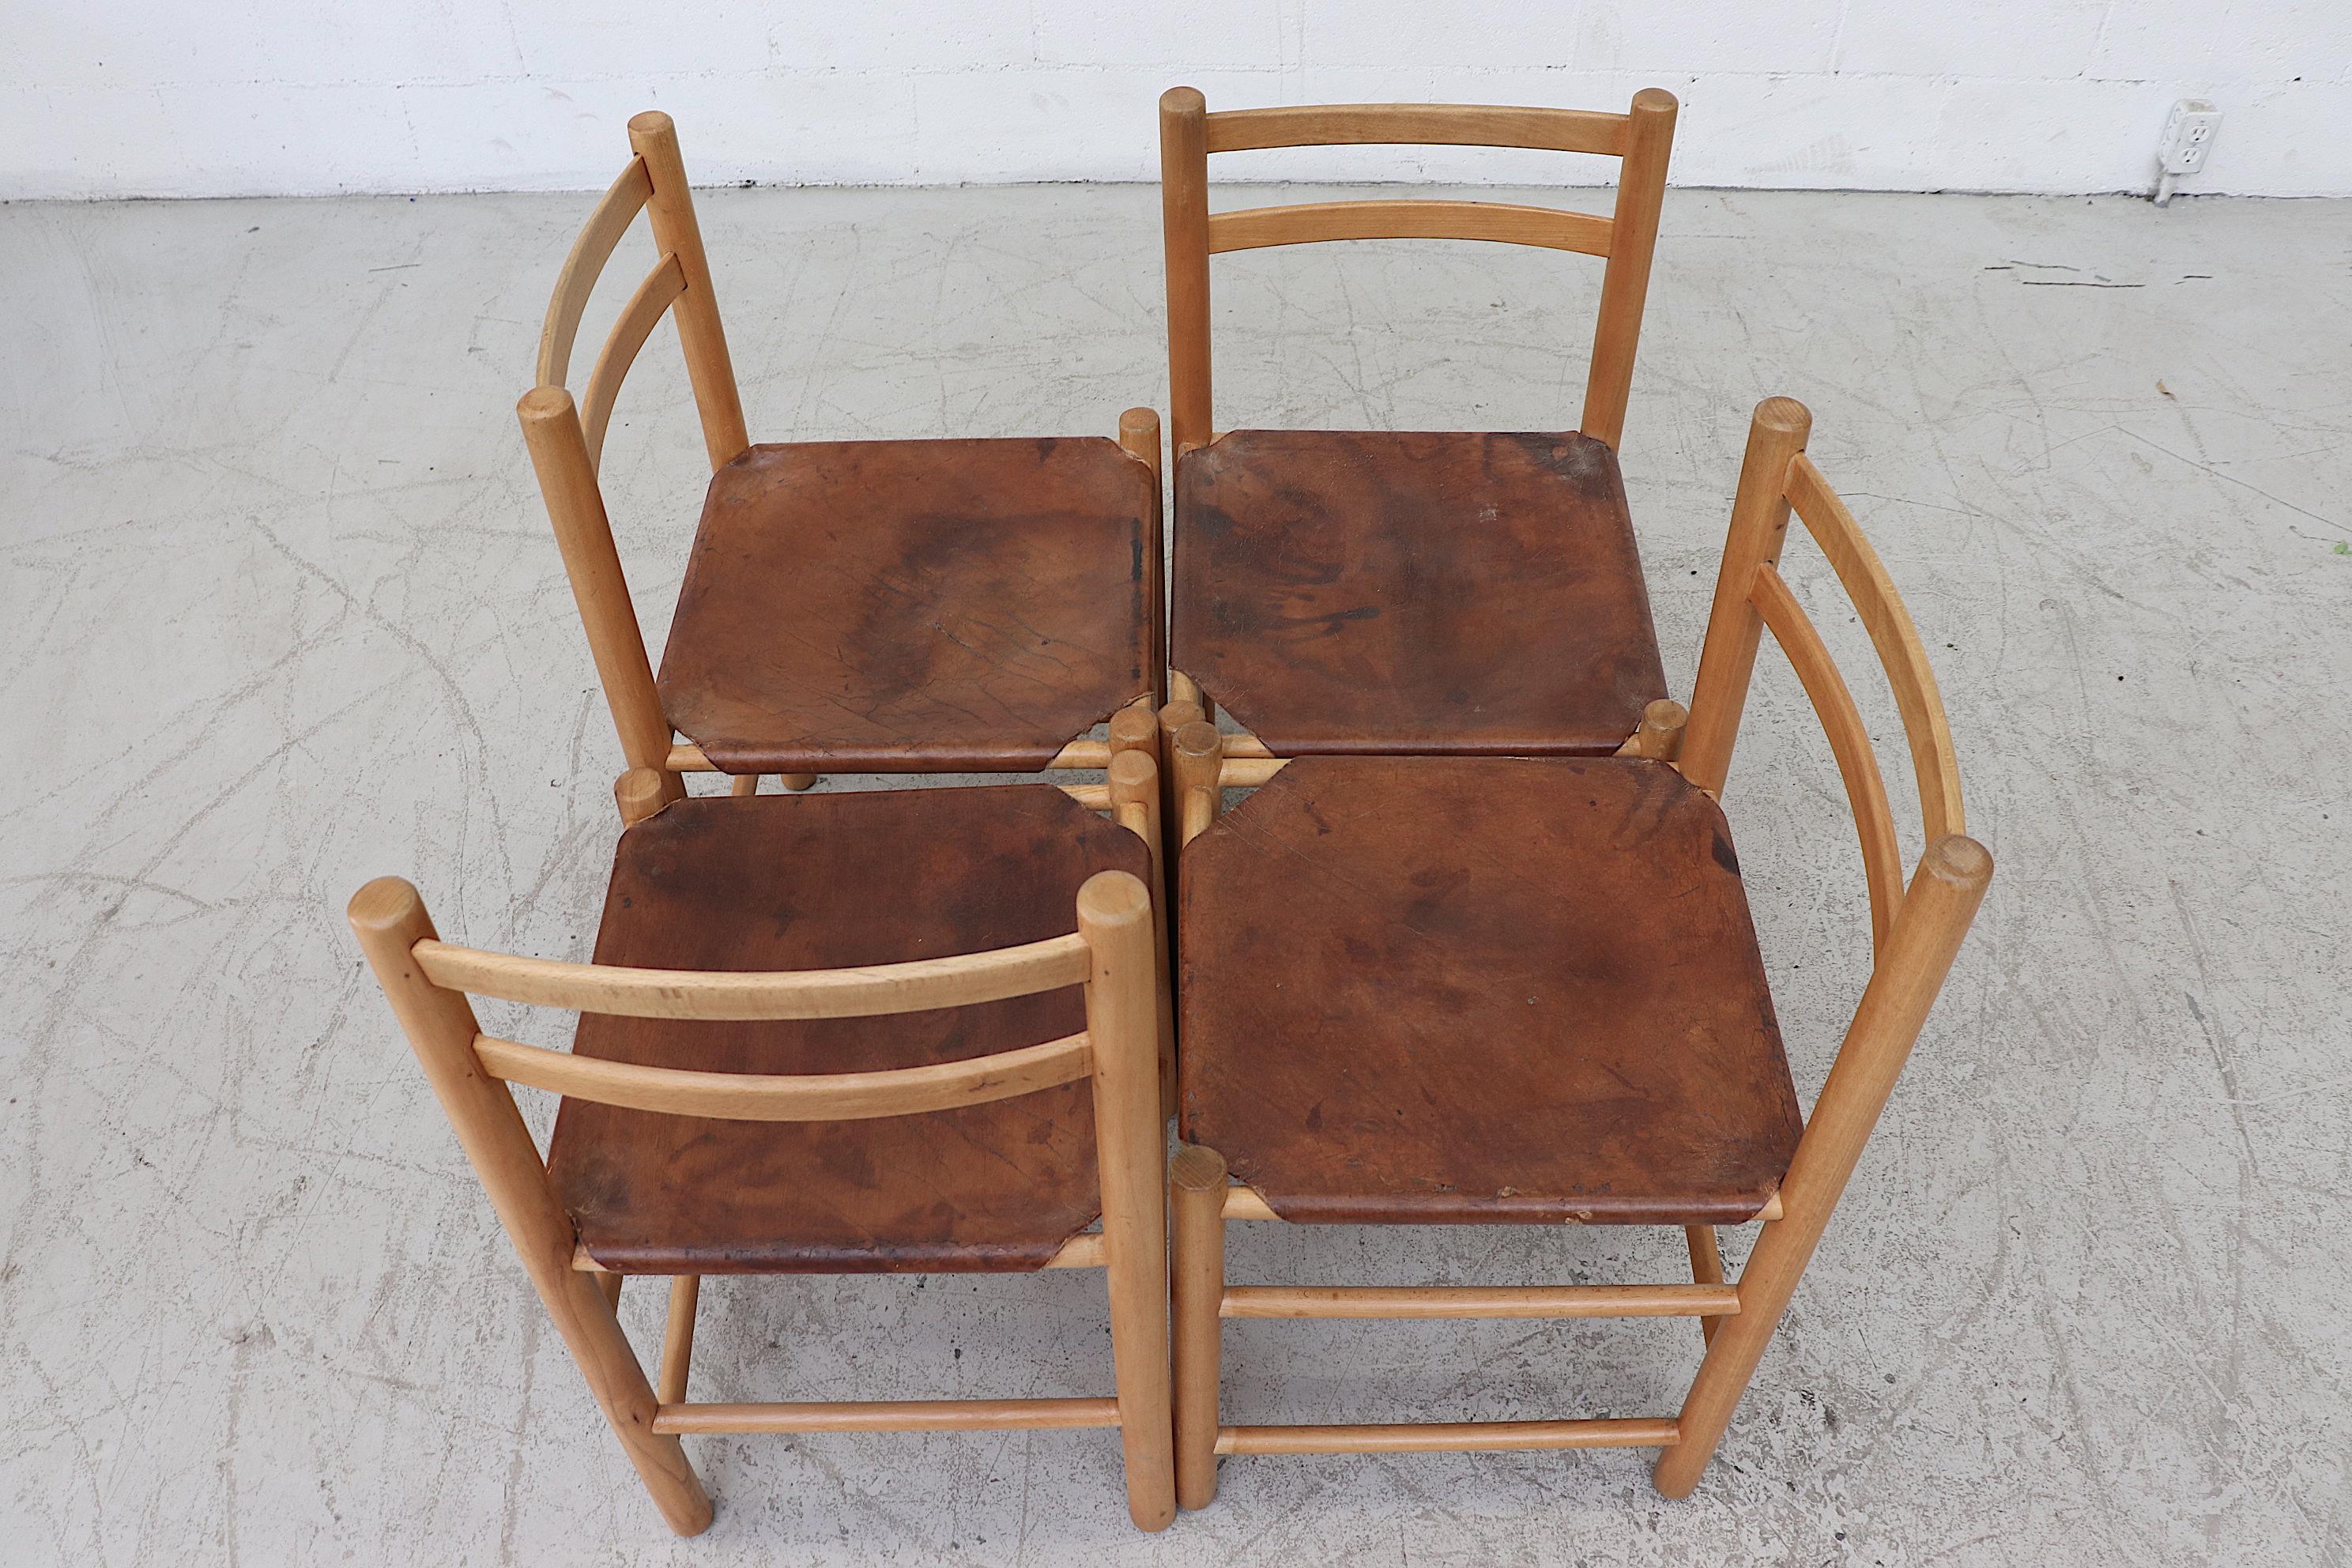 Primitive Charlotte Perriand style dining chairs with rope tied natural leather tanned hyde seats. Original condition - heavy patina on leather - some staining. Leather seating is corset tied to frame set price. Another similar set of 4 available